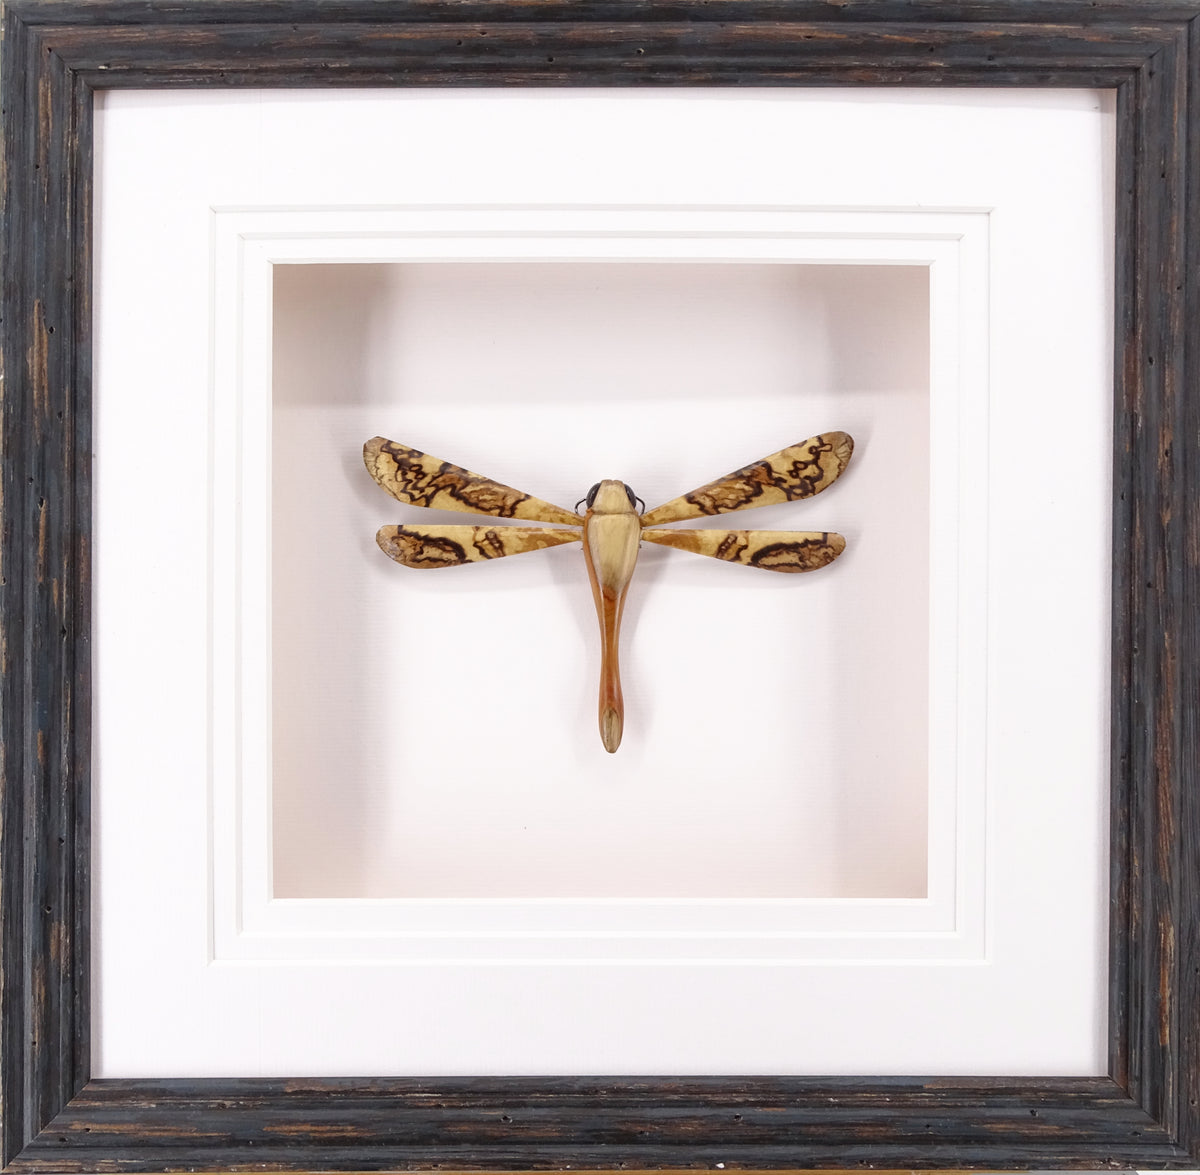 Spalted Beech & Yew dragonfly